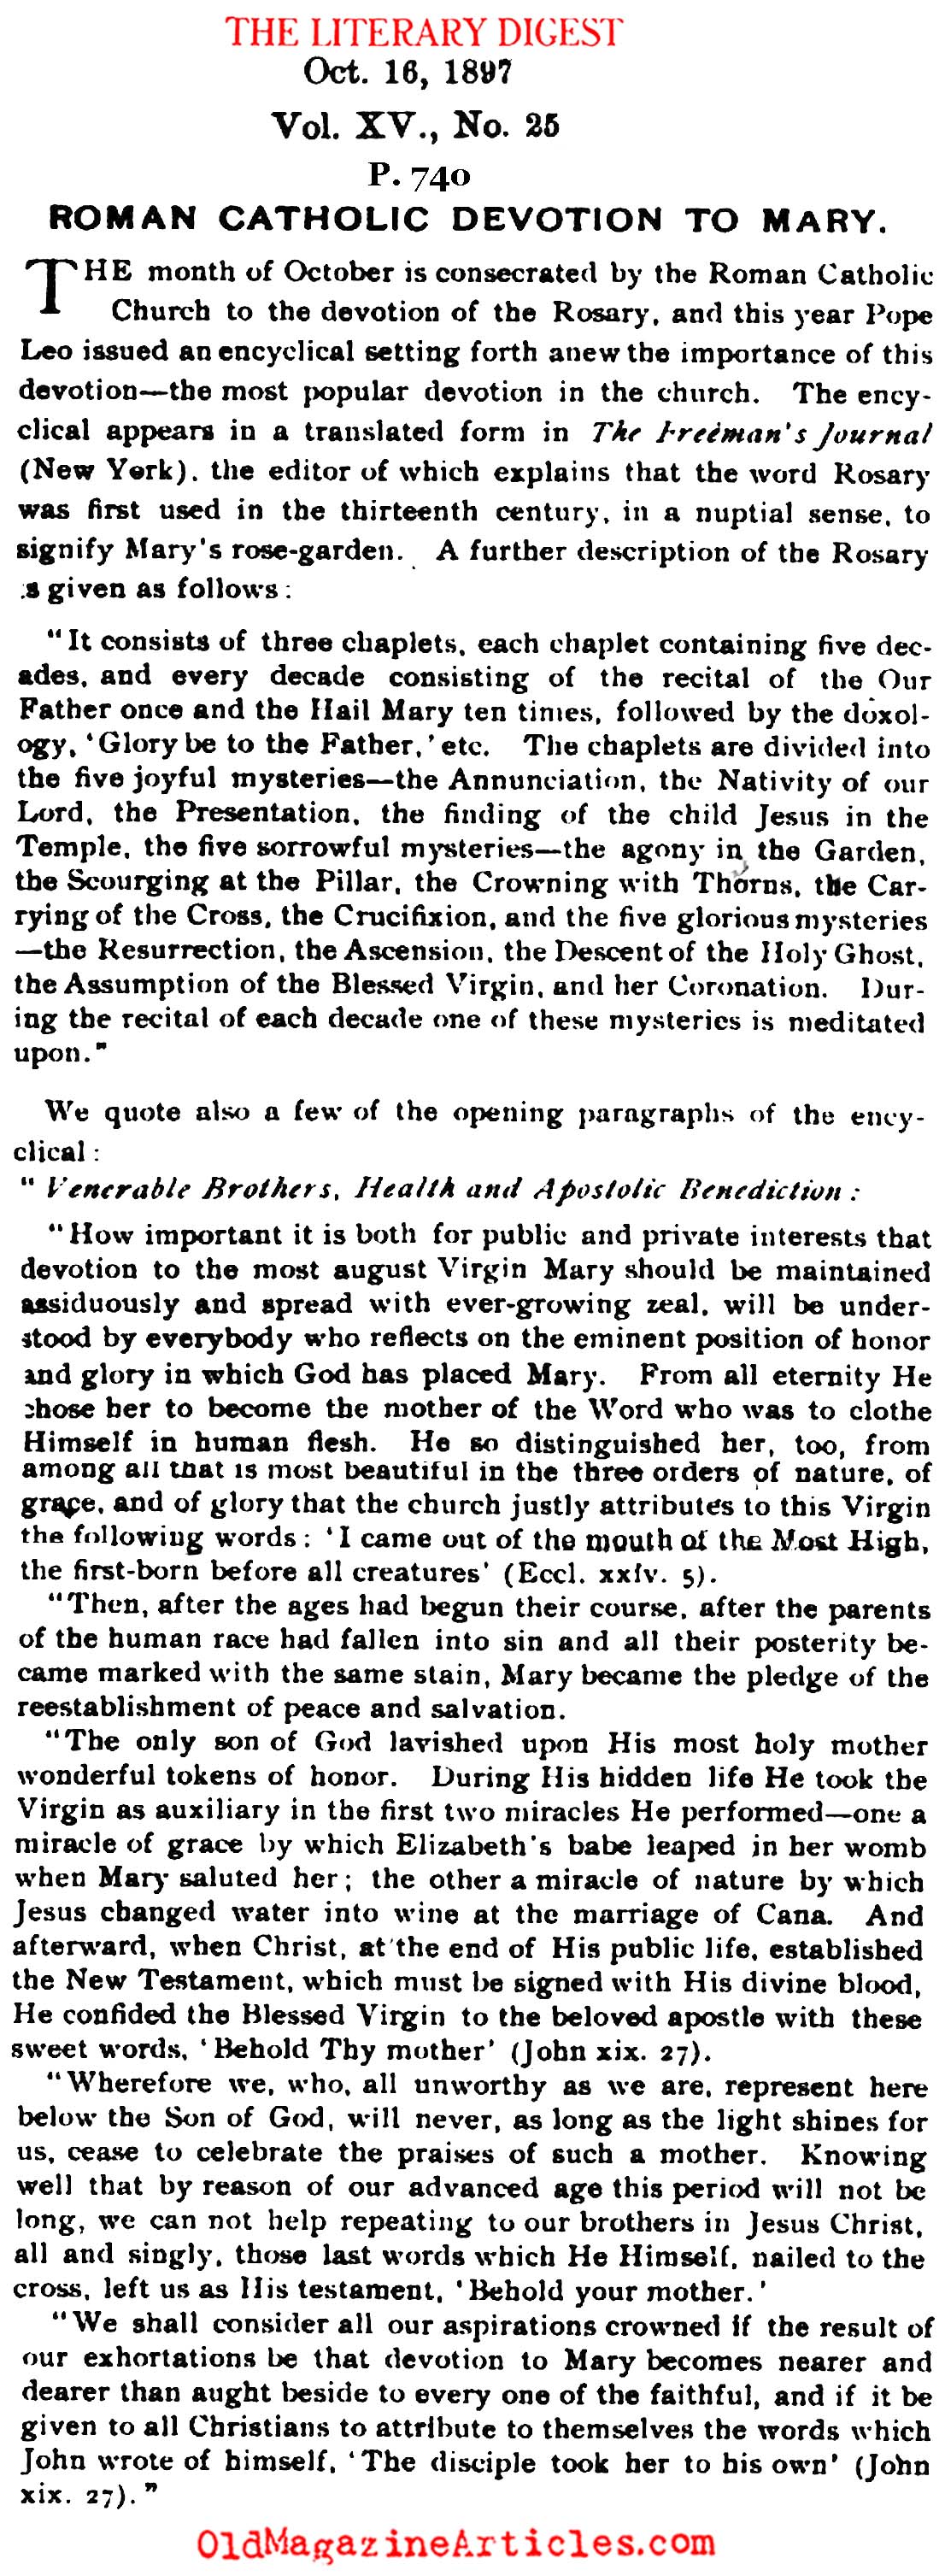 The Catholic Devotion to Mary (Literary Digest, 1897)